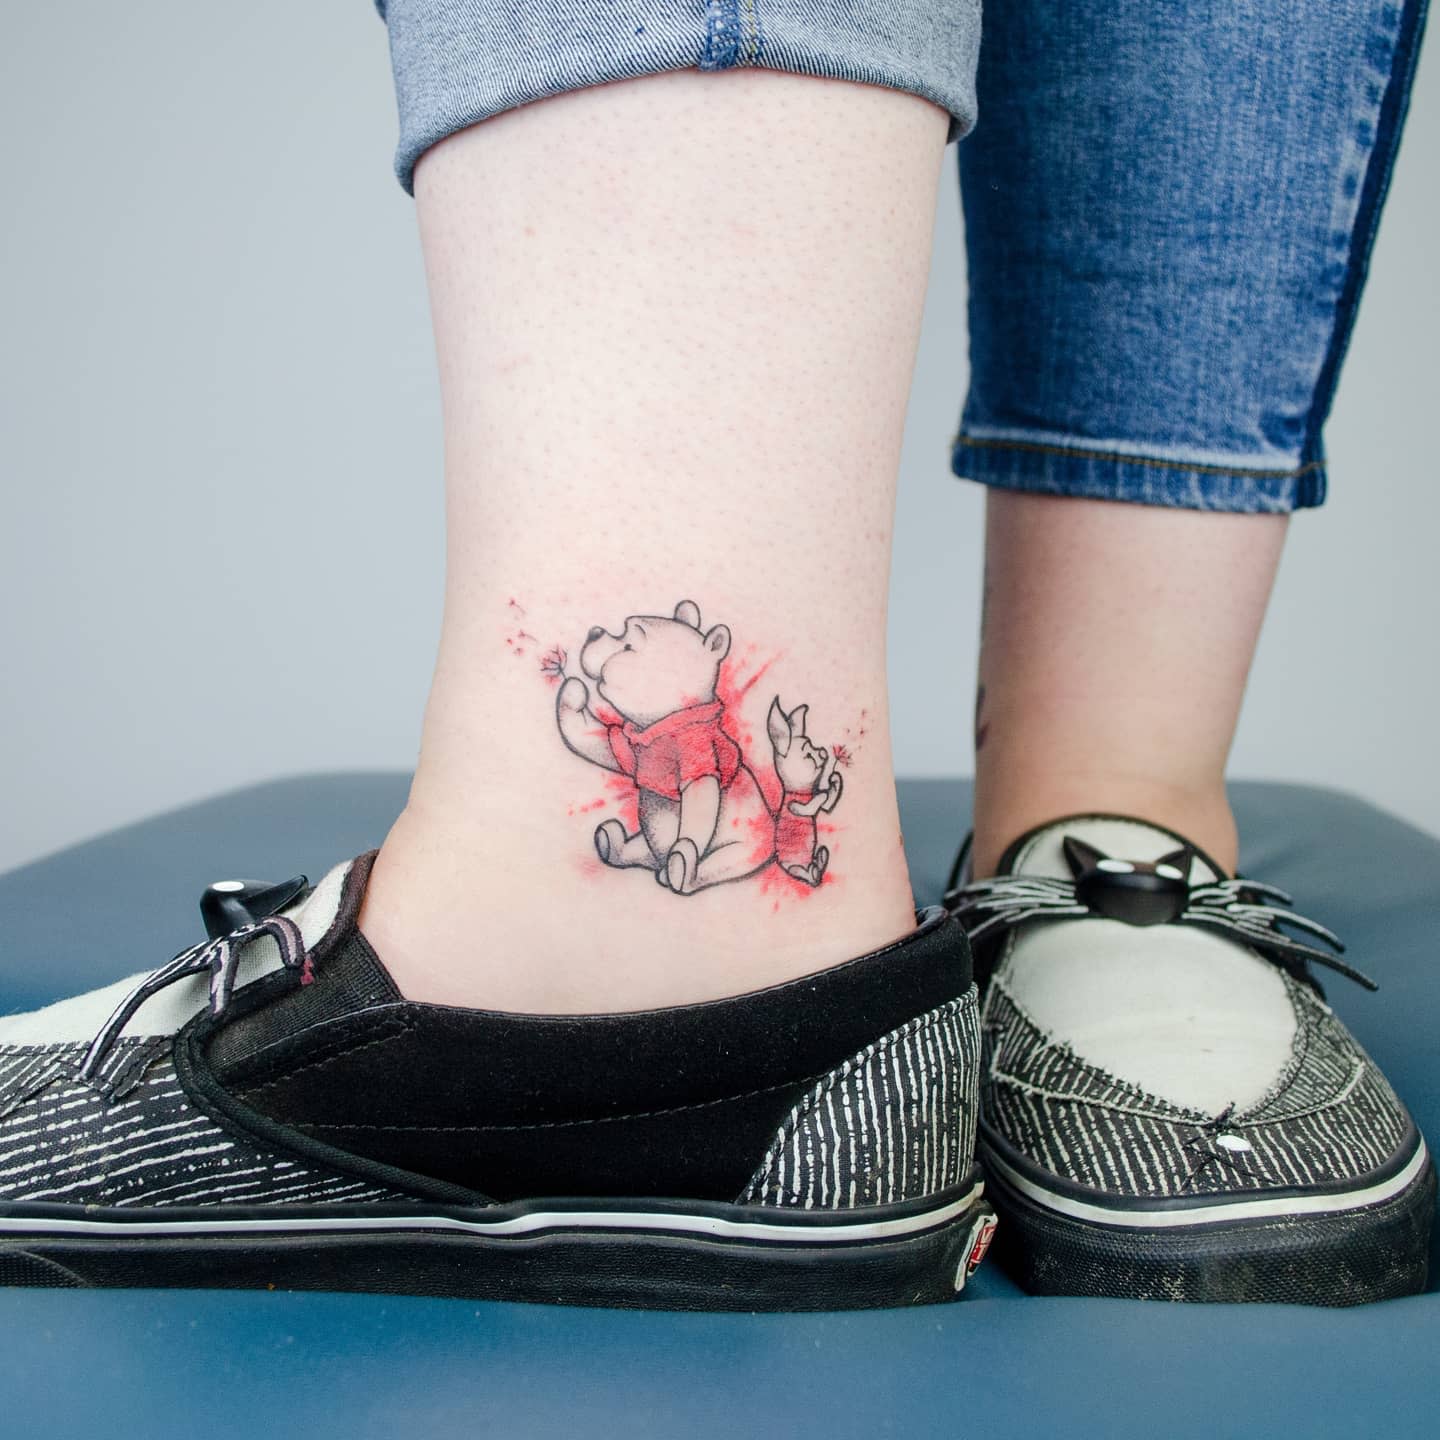 Winnie the Pooh from this morning  Thank you gissellgarcia  Booking  now     tattoo tattoos ink inked art tattooartist  Instagram